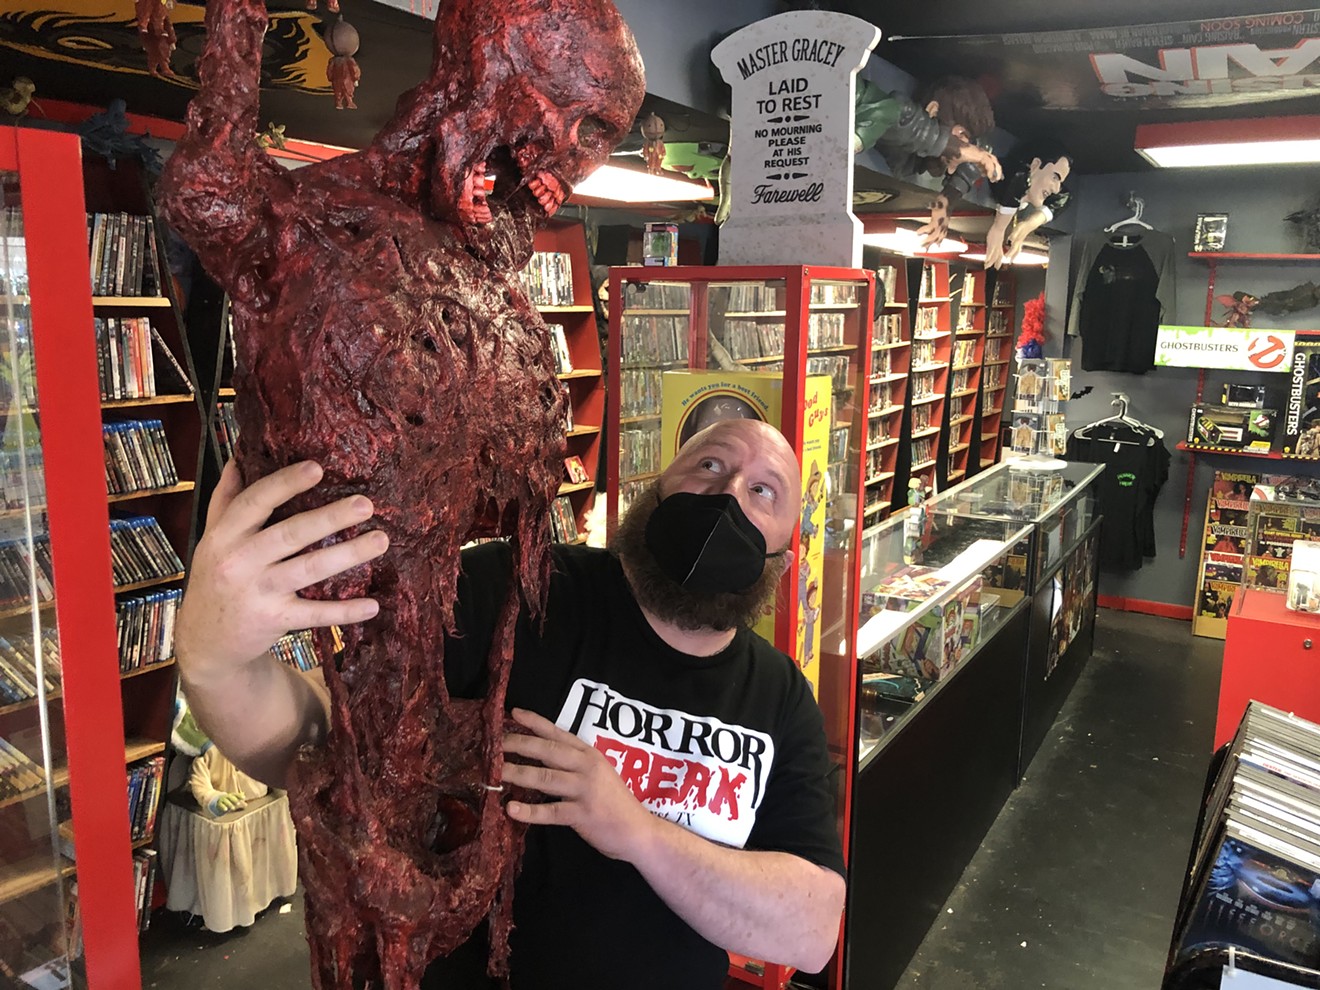 Eric Dallof, the owner of the Horror Freak collectible store in Bedford's Retro Plaza, has the first shop in DFW dedicated to grisly, gory and ghastly horror films and collectibles.